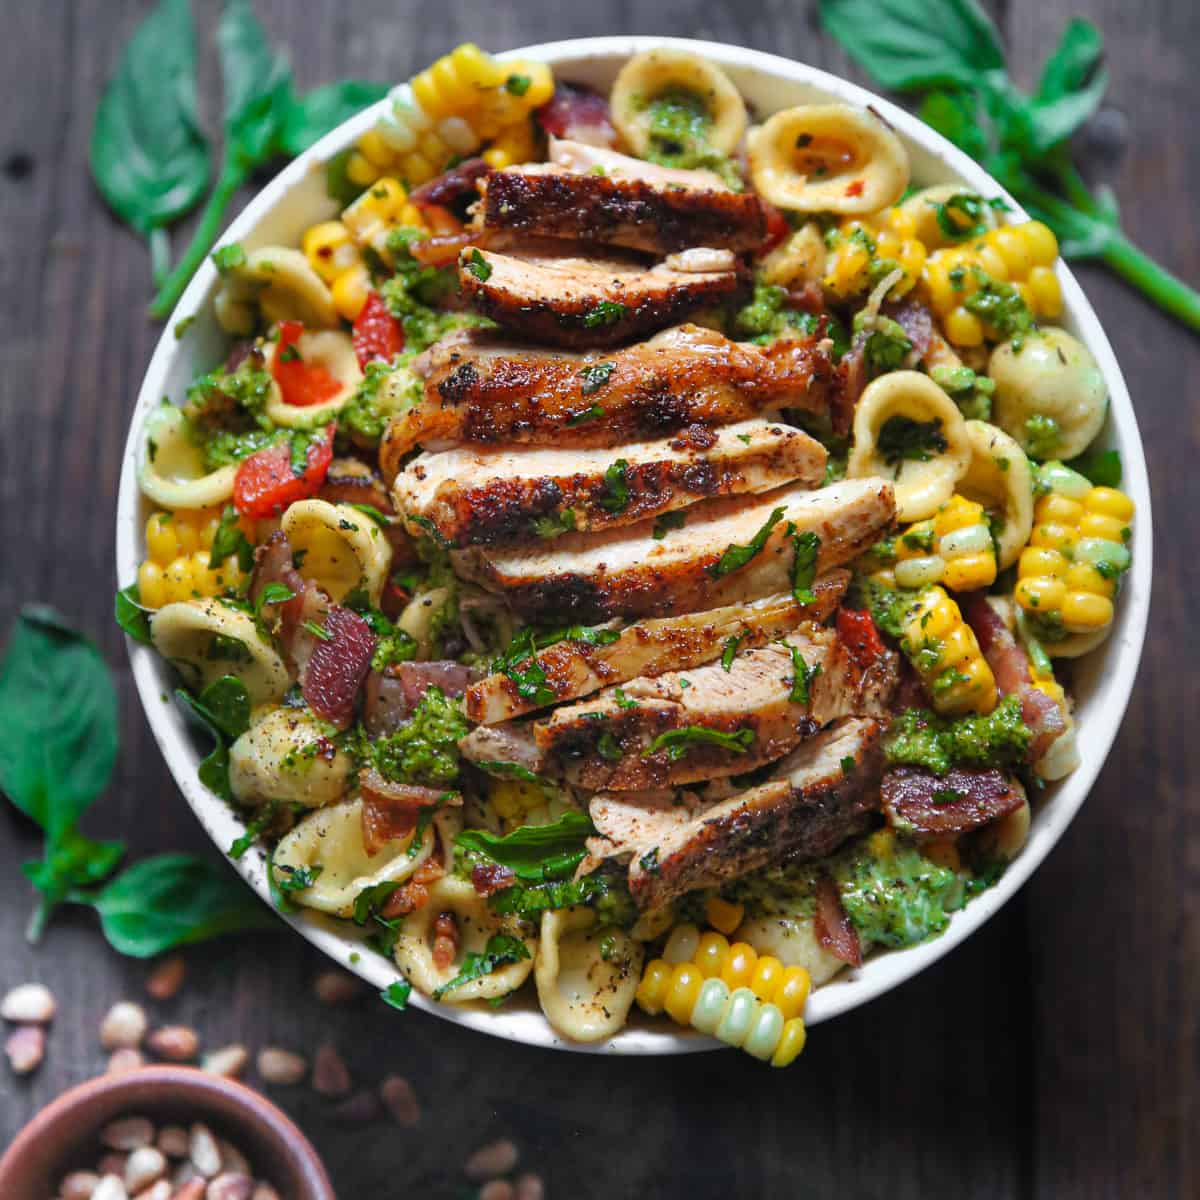 Chicken and Corn Pasta Salad with Bacon, Bell Peppers, and Creamy Basil Pesto Dressing - in a white bowl.